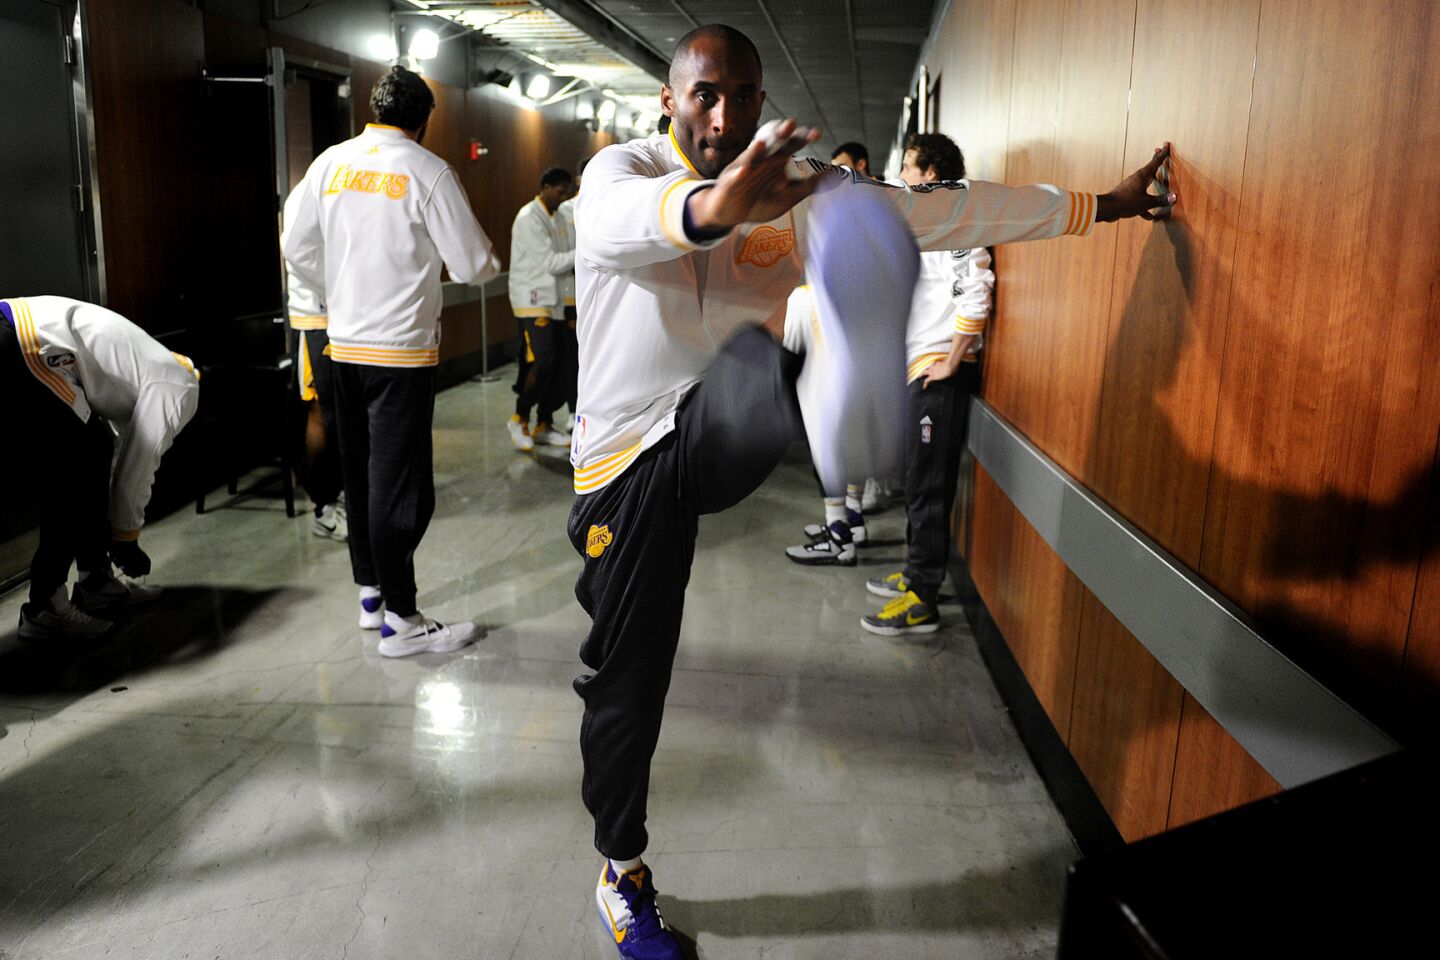 Lakers Kobe Bryant warms up outside the locker room before a game with the Knicks at the Staples Center.